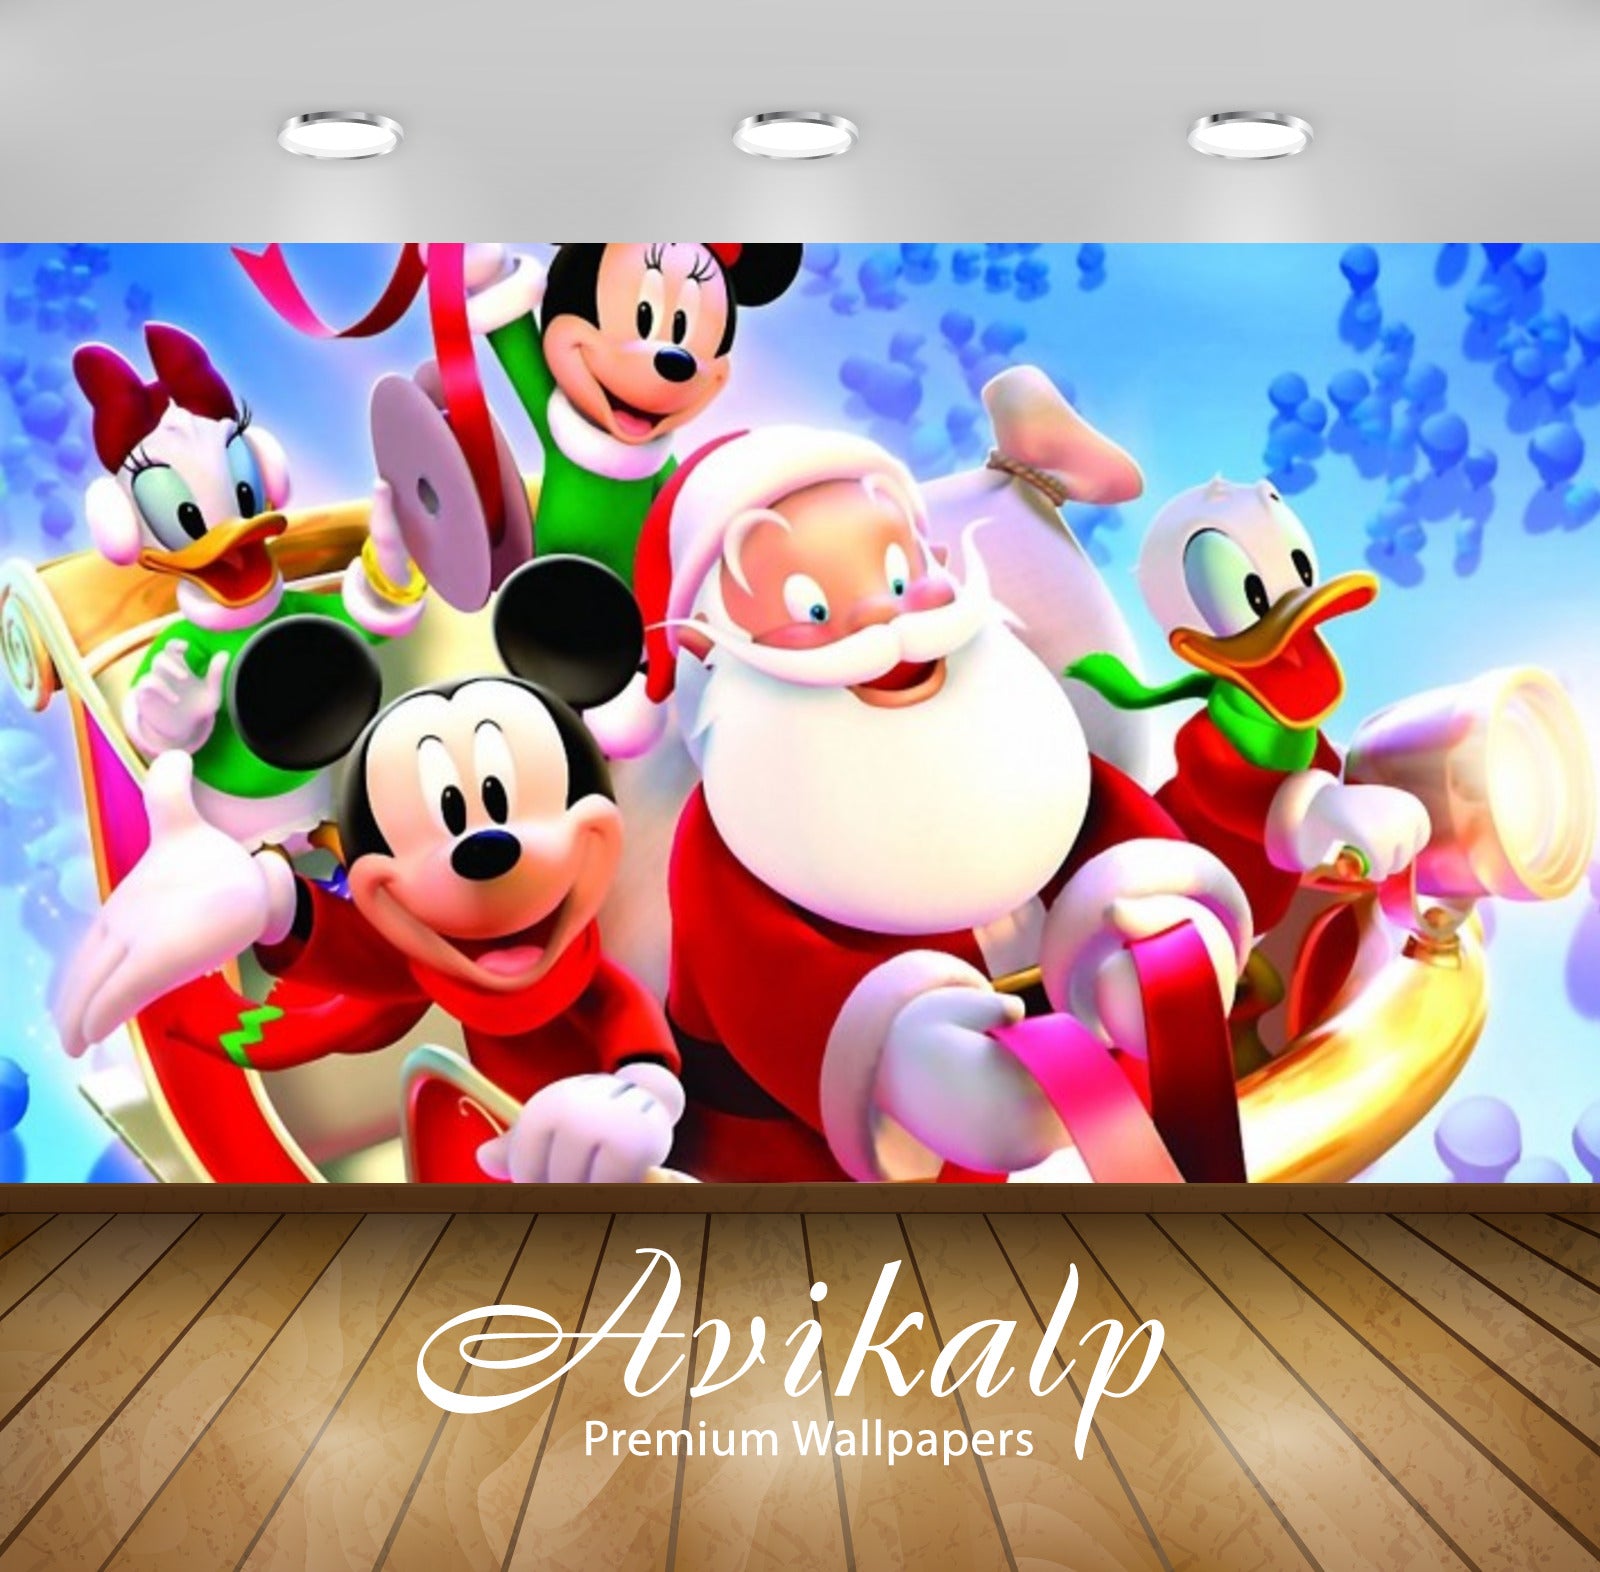 Avikalp Exclusive Awi2058 Disney Christmass Mickey Mouse With Santa Claus  Full HD Wallpapers for Li